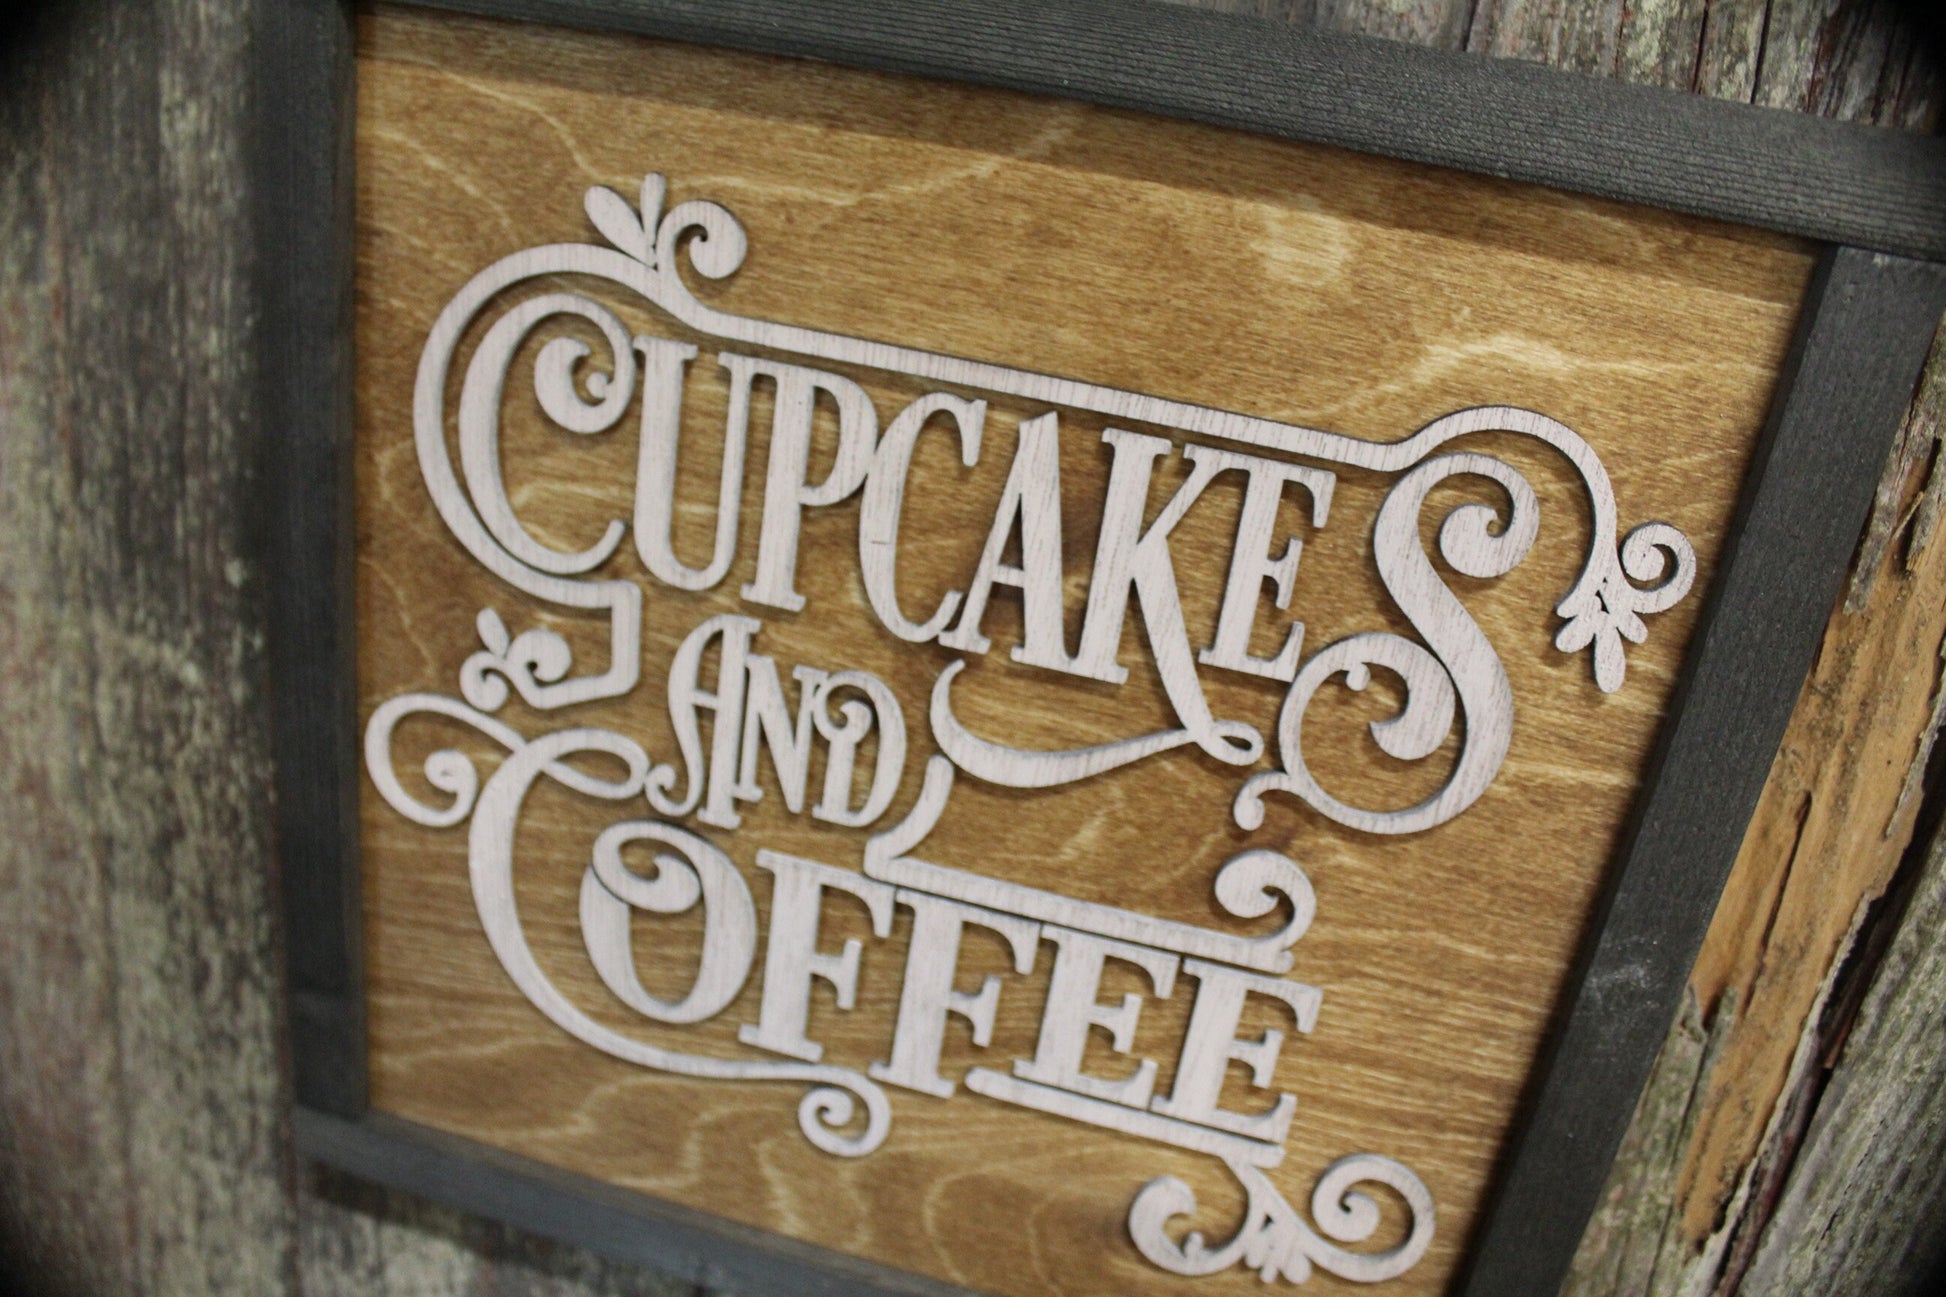 Cupcakes and Coffee Script Raised Text Wood Sign 3D Kitchen Sign Bakery Decoration Dessert Bar Coffee Bar Rustic Primitive Wall Decor